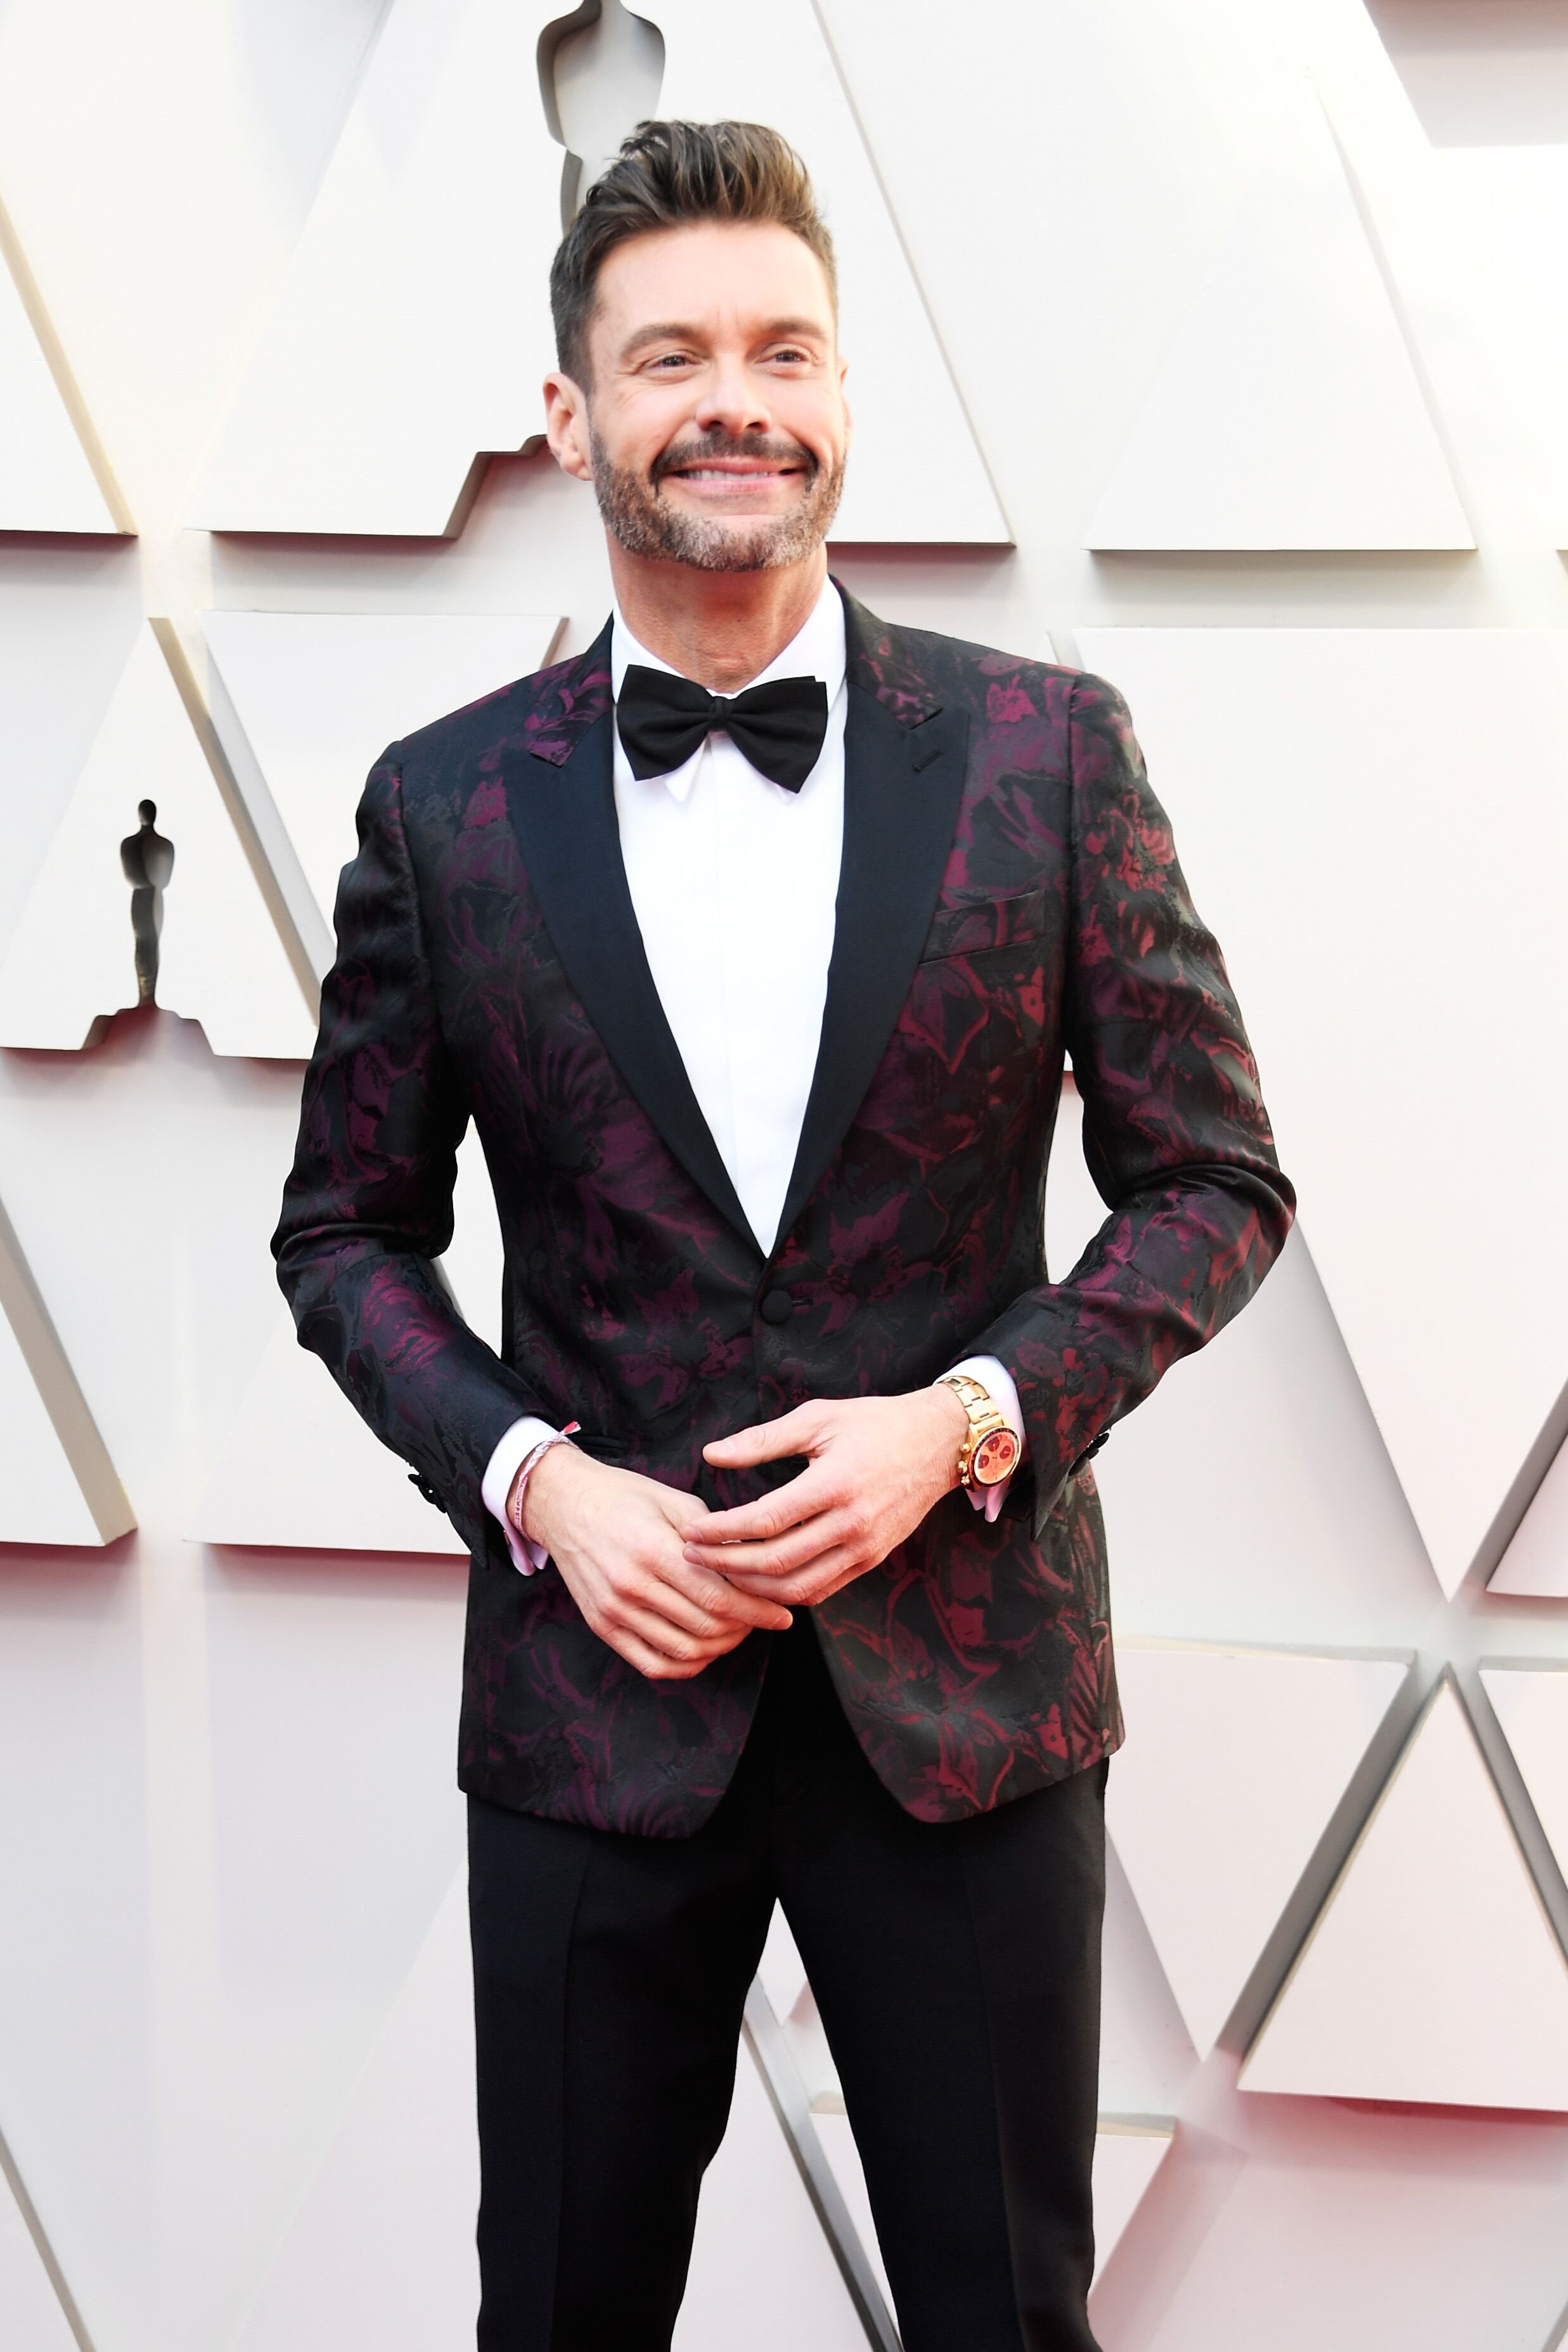 Ryan Seacrest attends the 91st Annual Academy Awards on February 24, 2019 | Photo: Getty Images